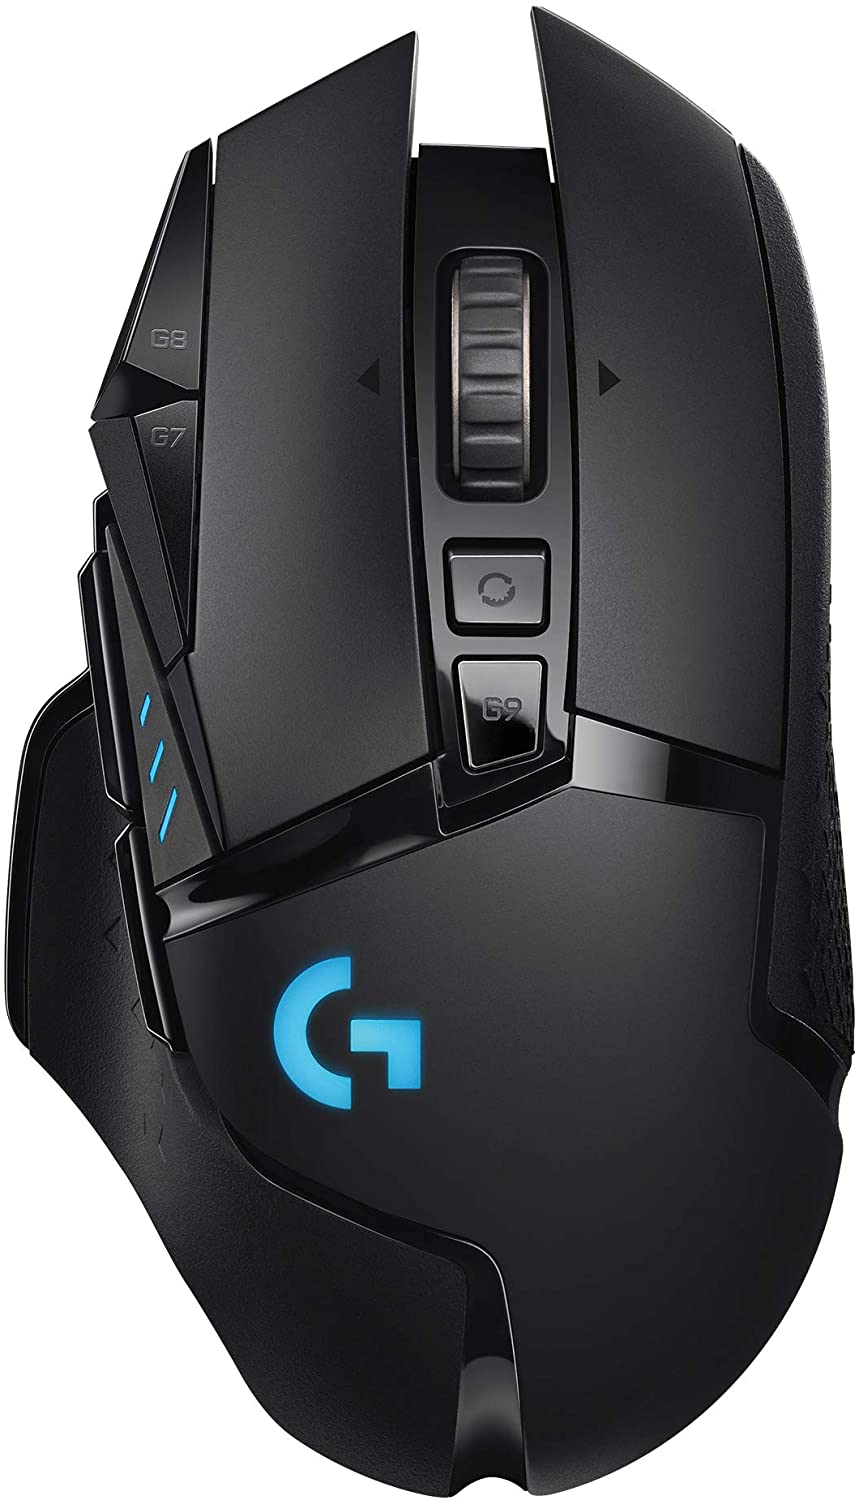 Logitech G502 Lightspeed Wireless Gaming Mouse on SALE now , 40% off, only $89.99 out of $149.99